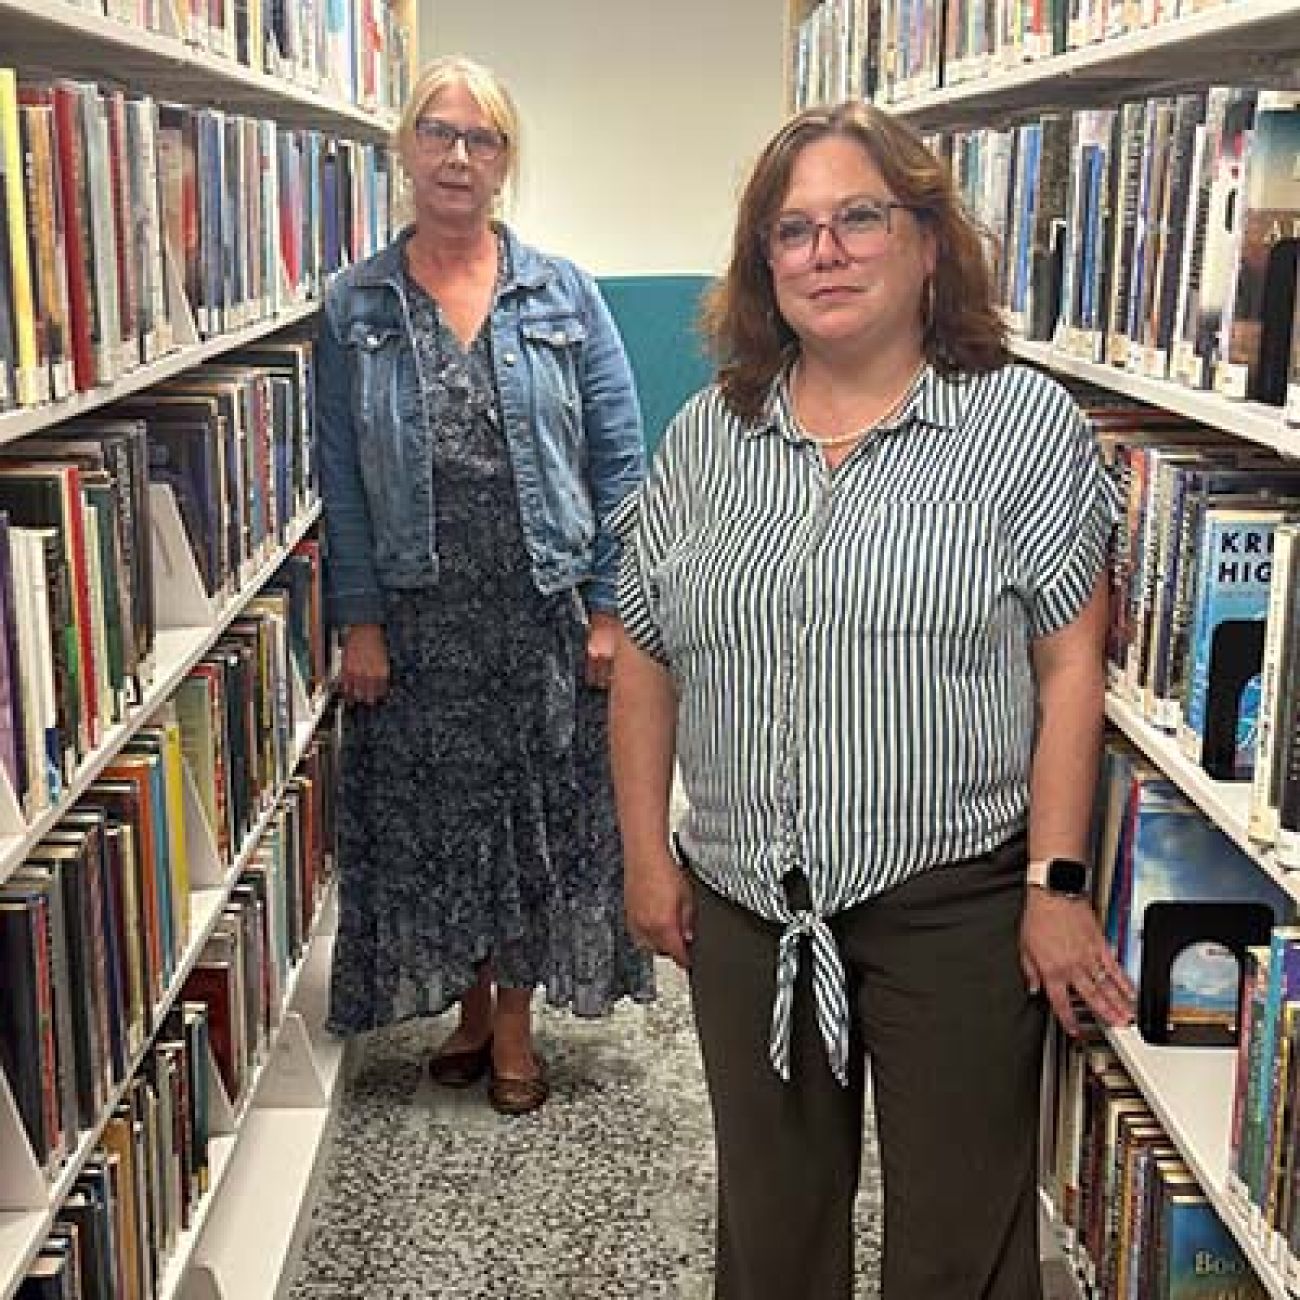 Alpena Library Assistant Director Jessica Luther and Director Debra Greenacre standing in between two bookshelves,